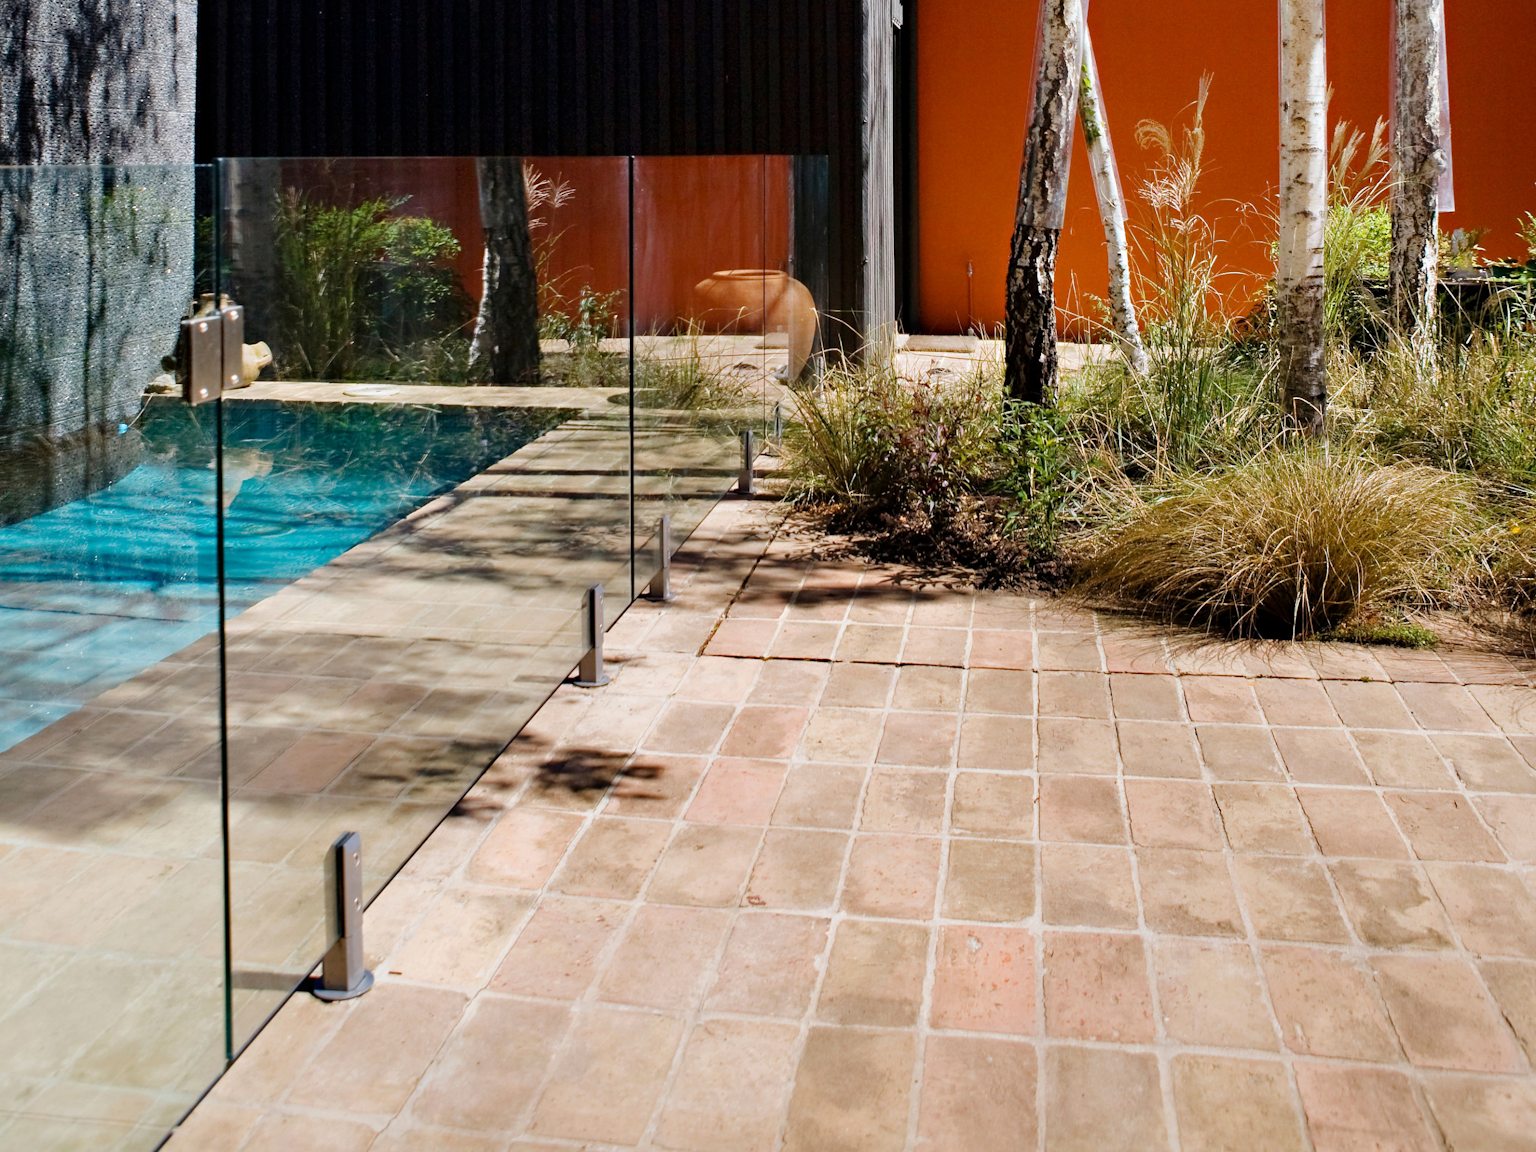 View  along pool fencing of Antico Luce terracotta pavers used in garden area